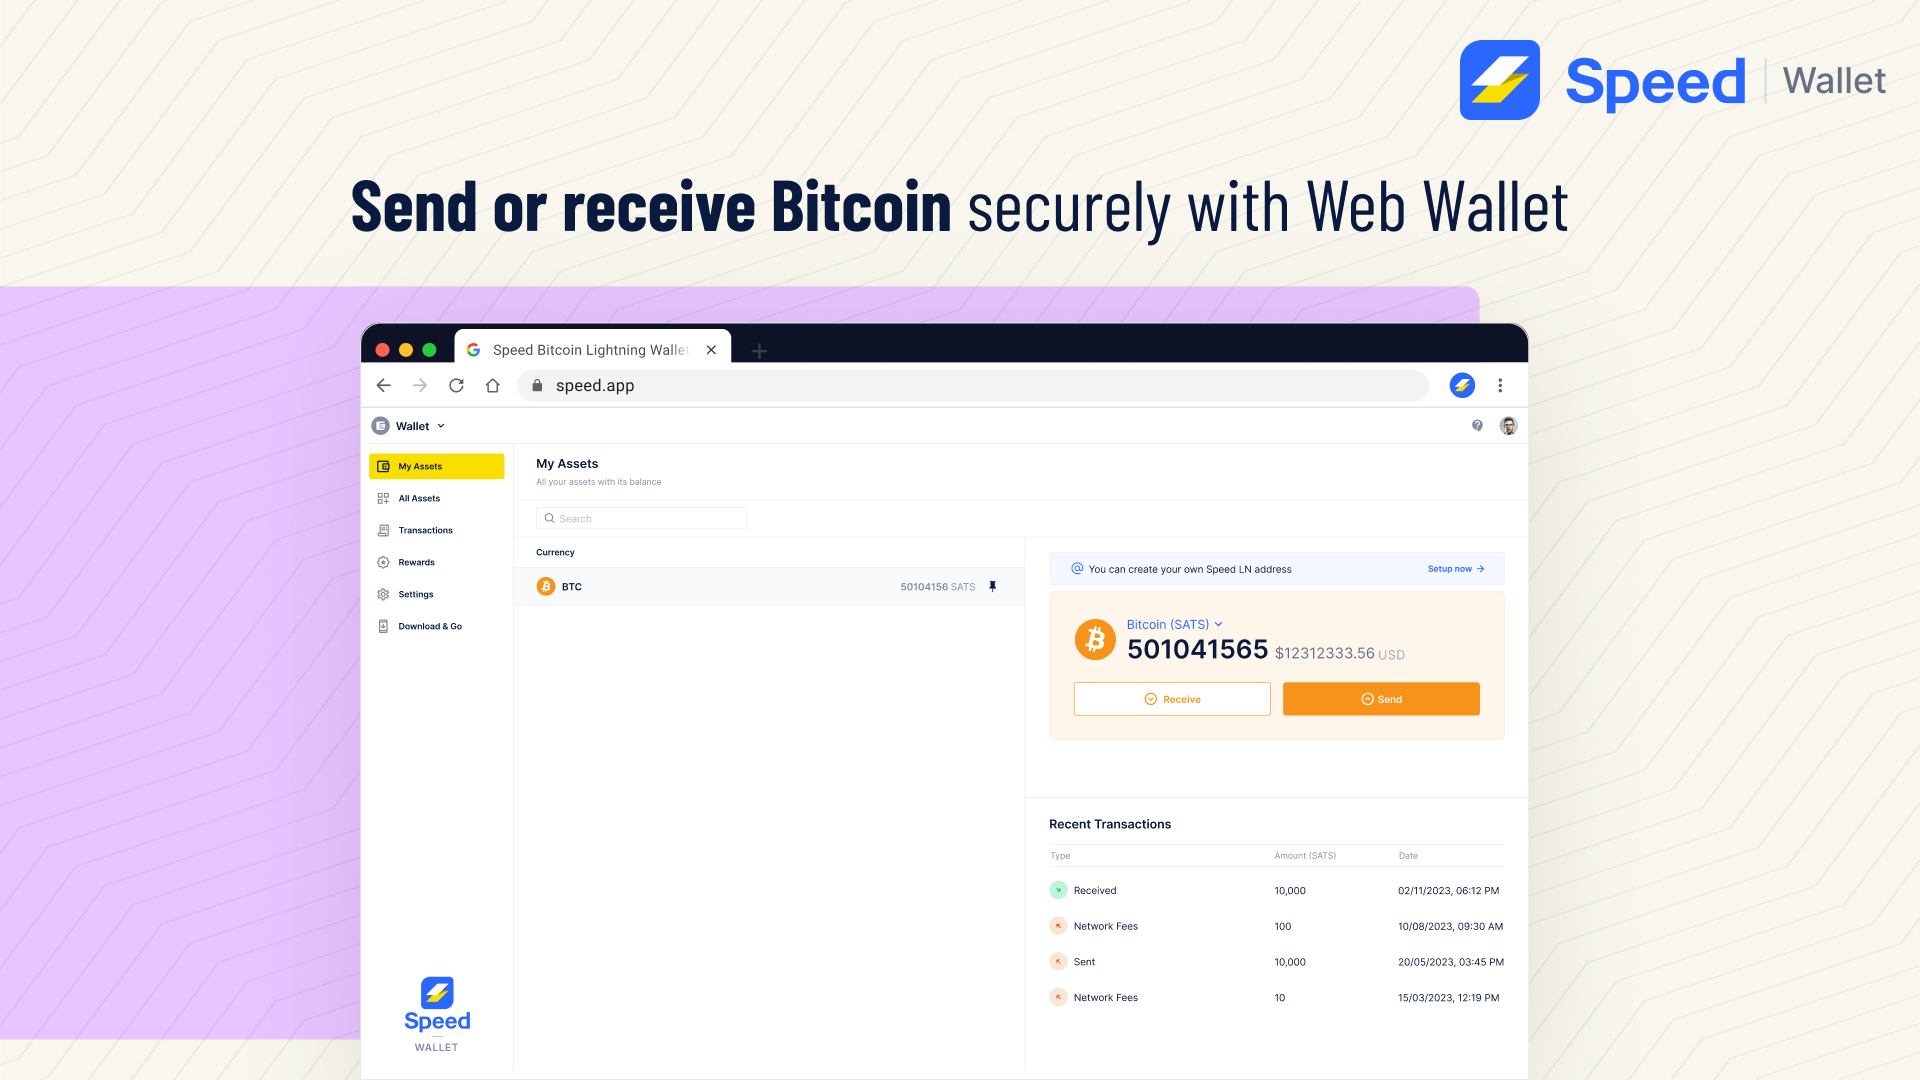 Send or receive Bitcoin securely with Web Wallet